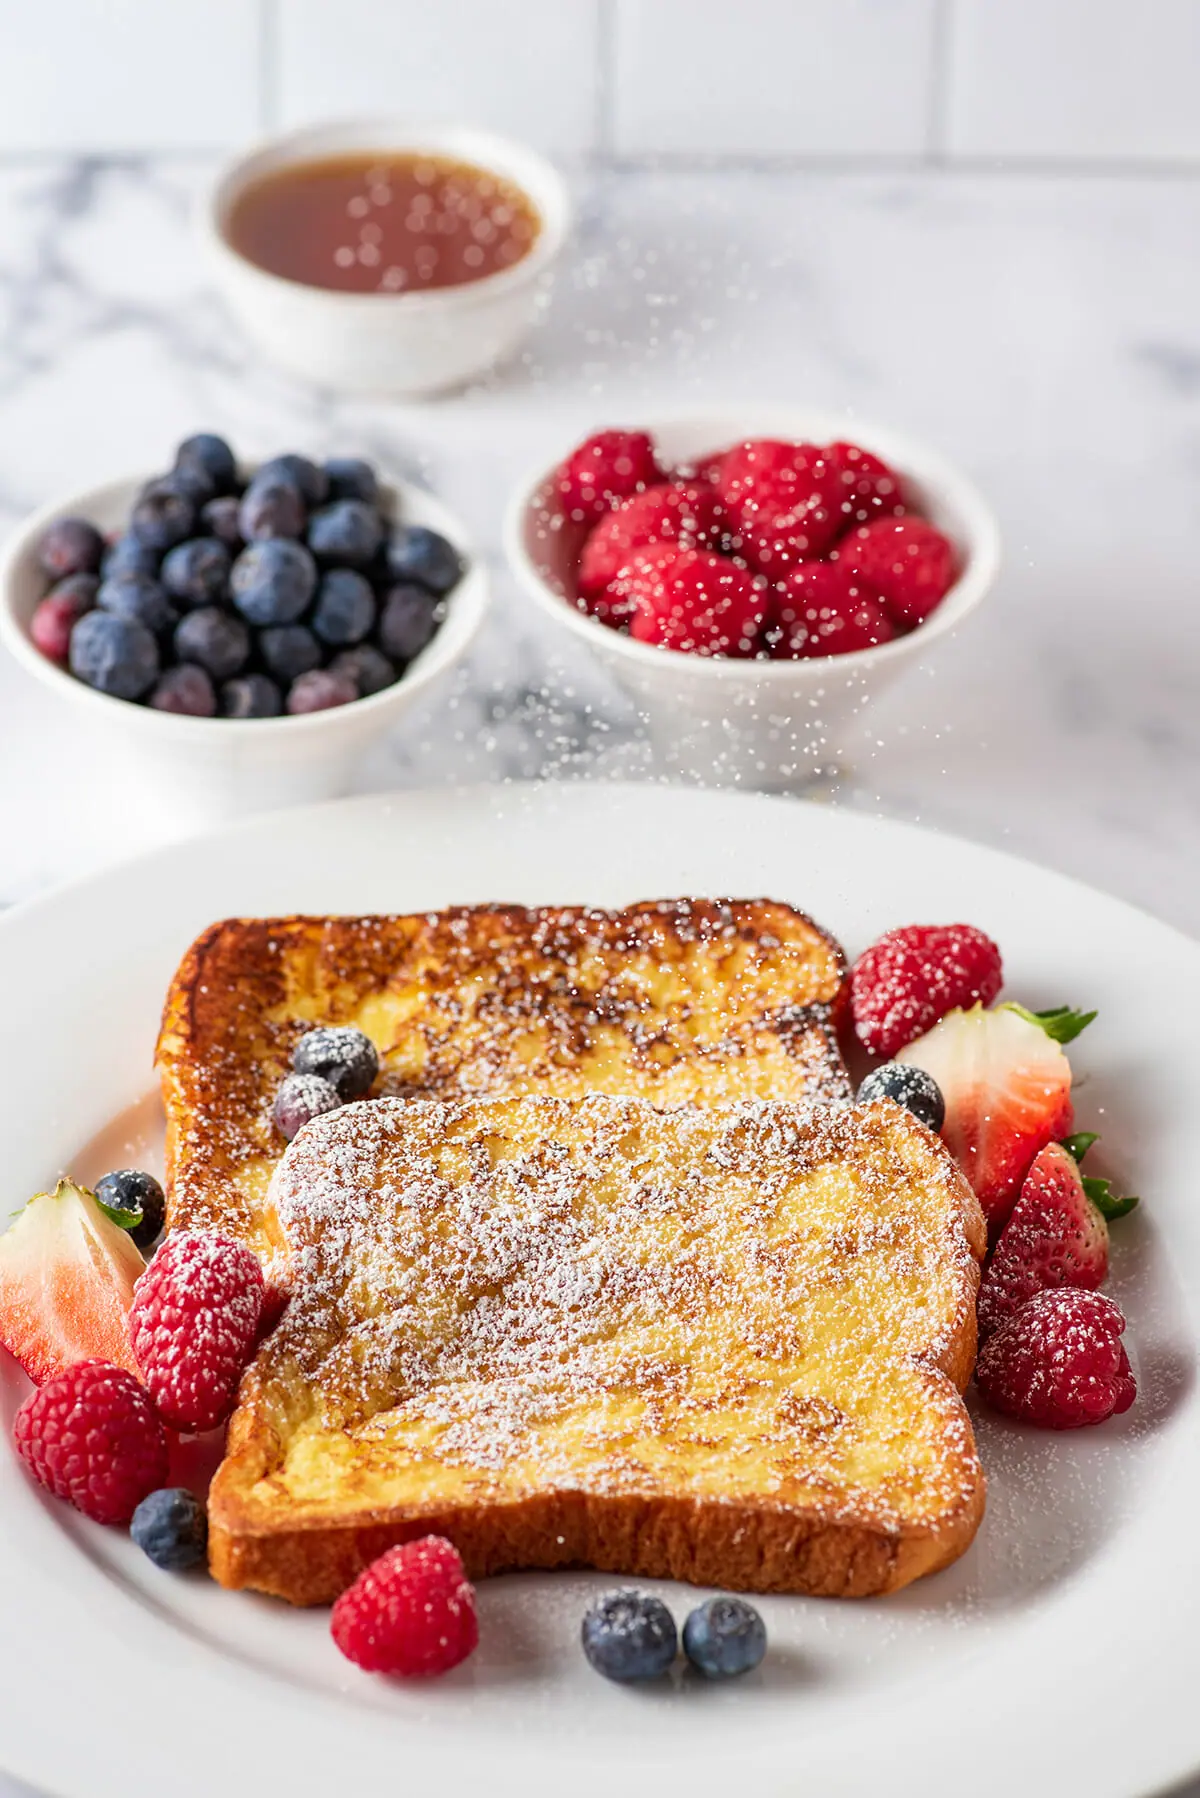 Homemade French toast with berries and powdered sugar.